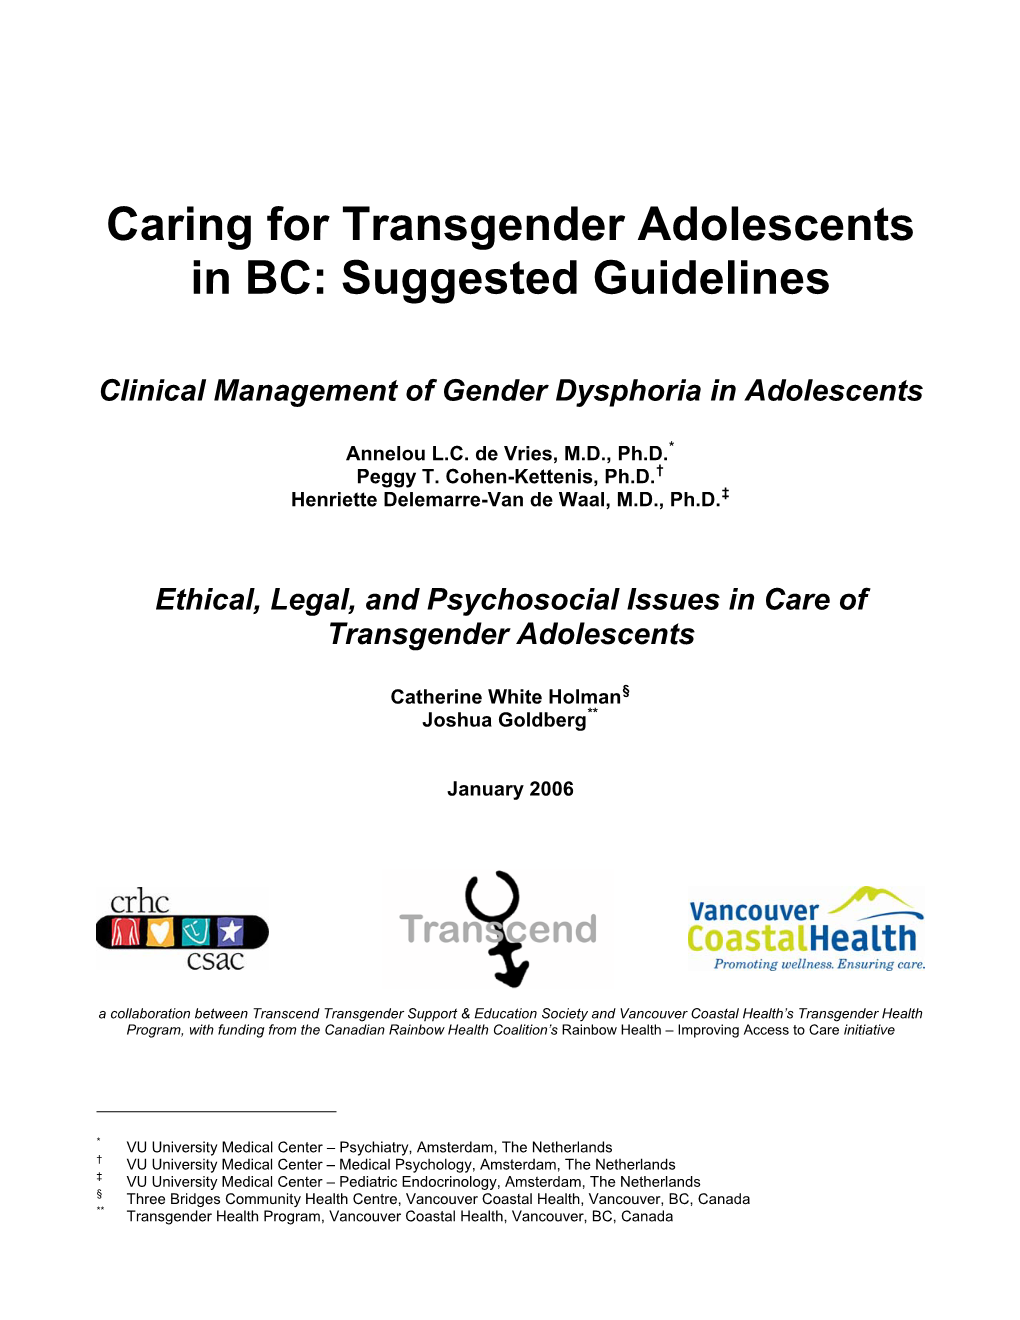 Caring for Transgender Adolescents in BC: Suggested Guidelines